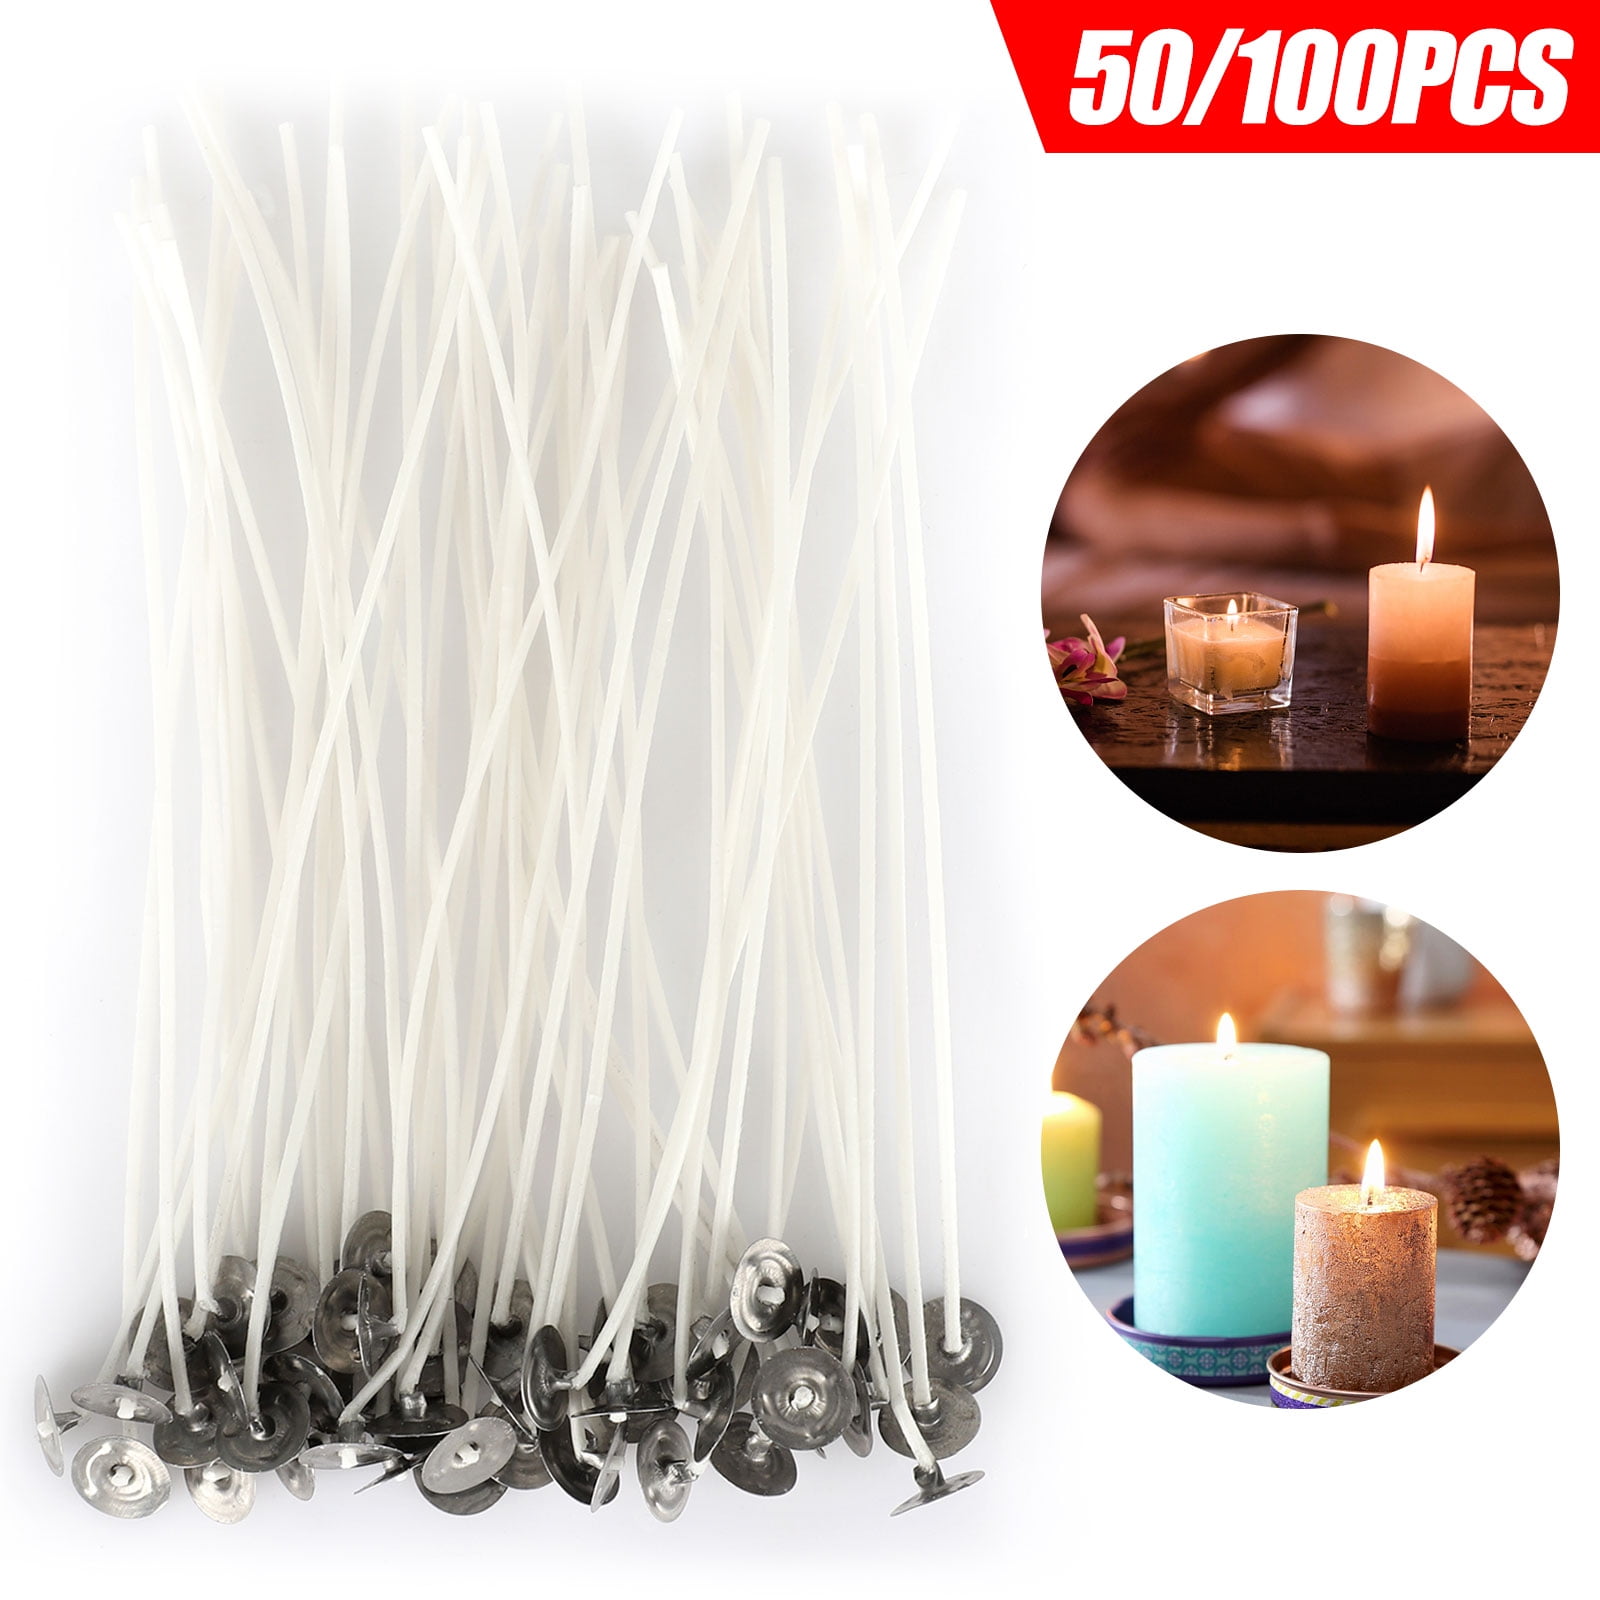 FOME Candle Wick 100 Piece 4 inch Low Smoke Cotton Wicks Pre Waxed Wicks Candle Making Wick Natural Cotton Core for Candle Making Candle DIY 